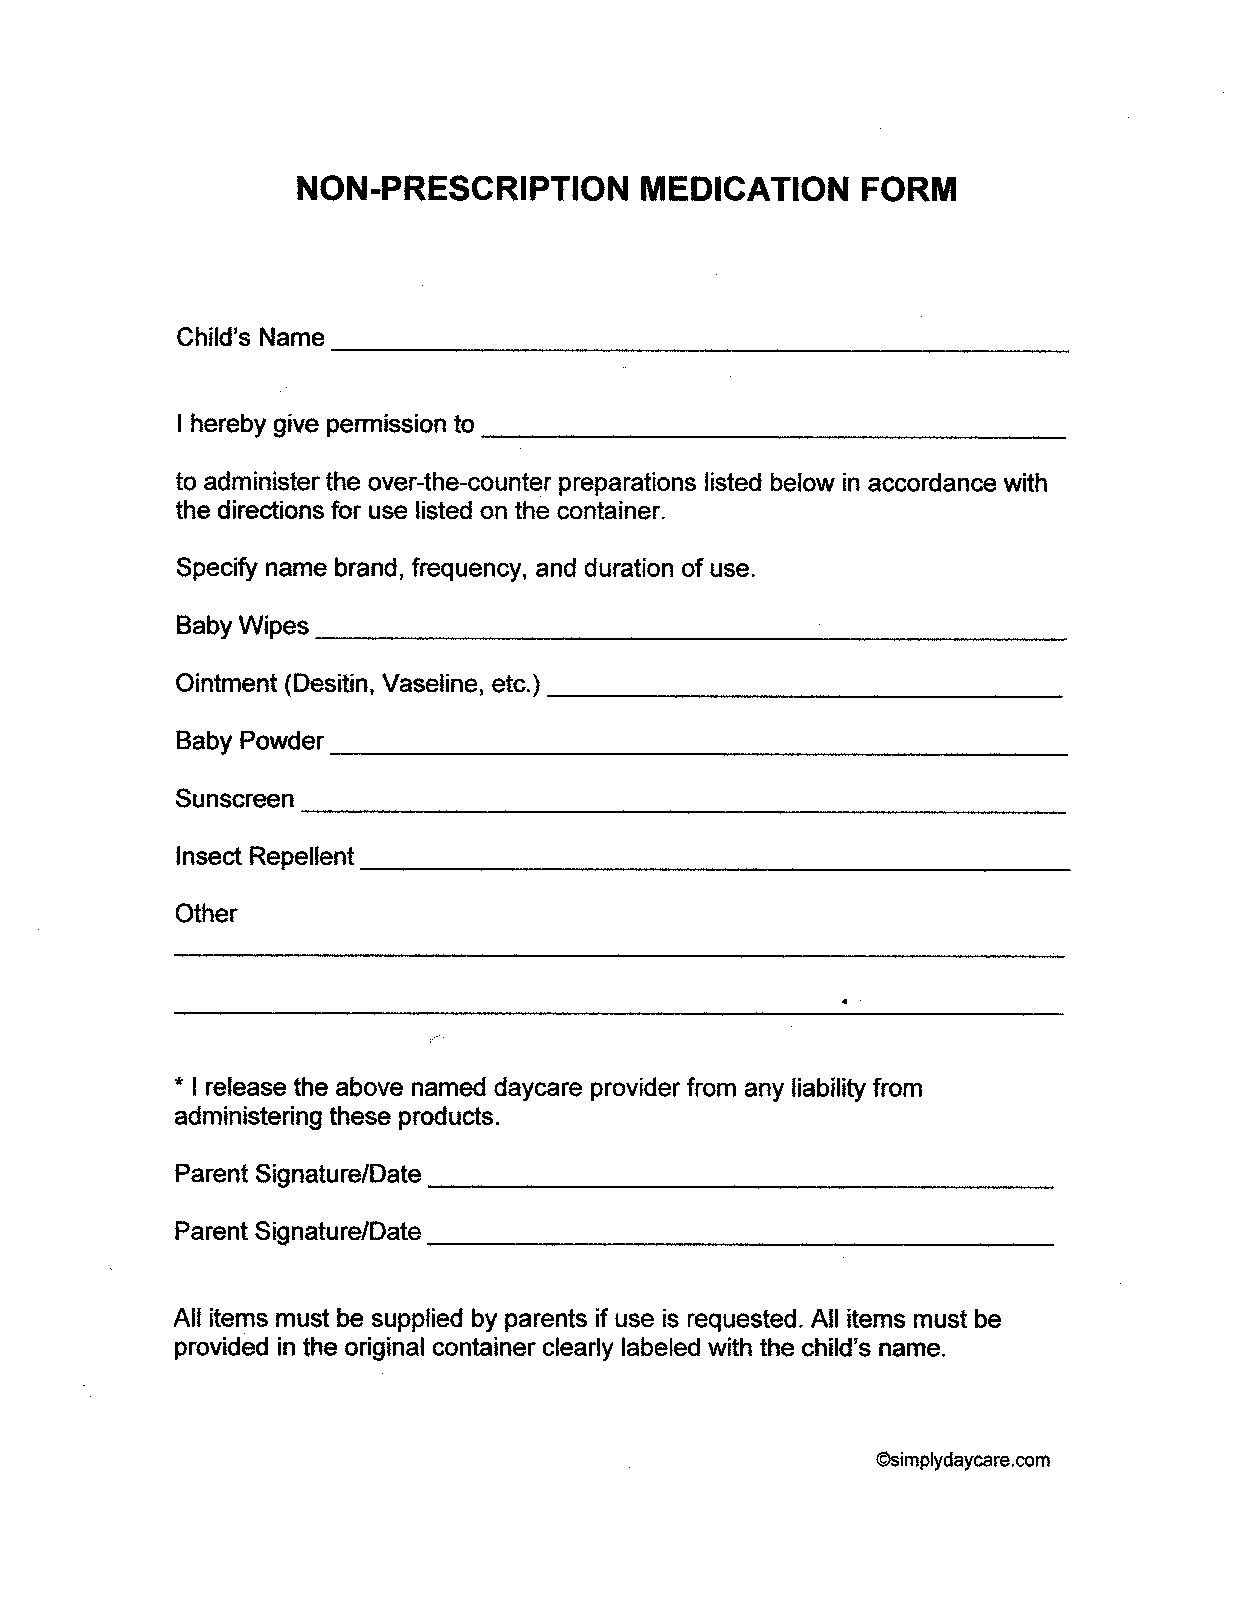 Free Child Care Forms To Make Starting Your Daycare Even Easier - Free Printable Daycare Forms For Parents